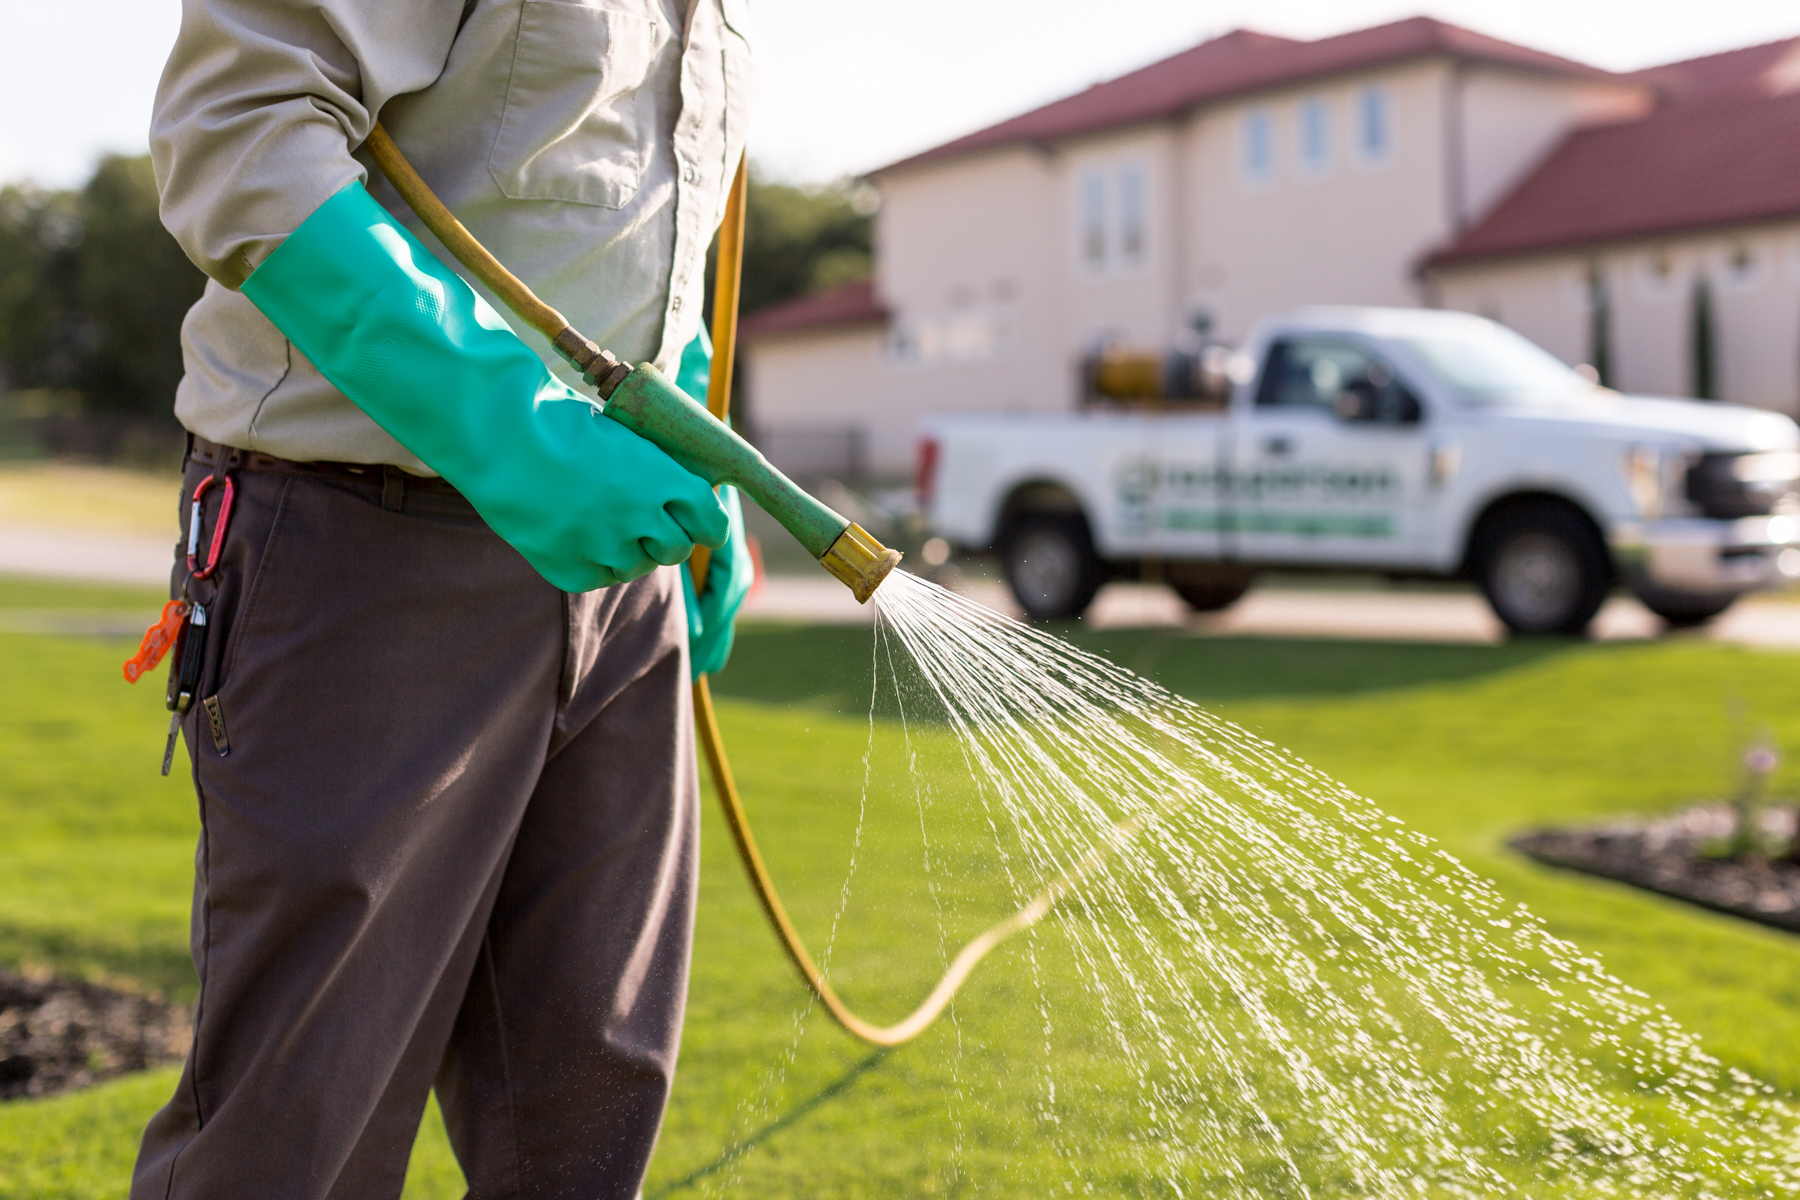 Cost of a Lawn Care Service vs. DIY: 4 Things to Consider in North Texas